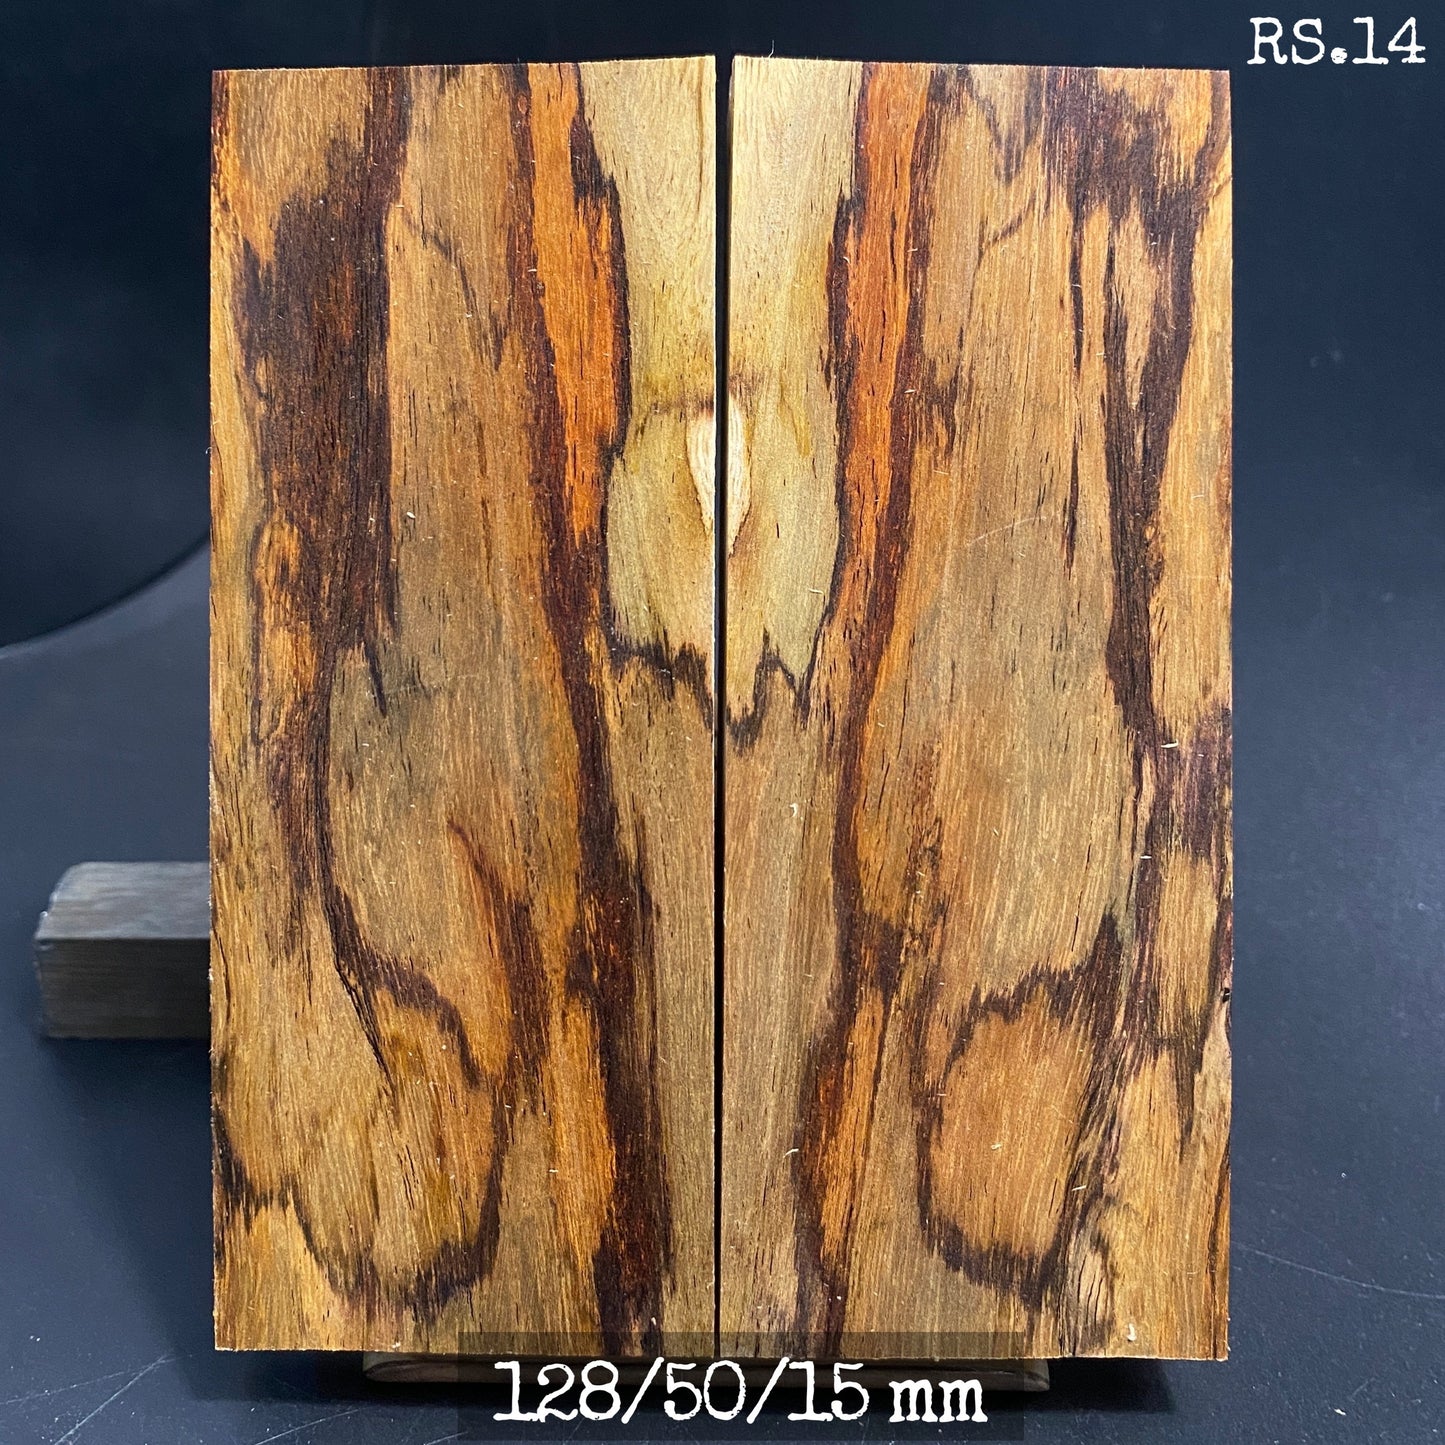 ROSEWOOD SPALTED, Mirror Blanks for Crafting, Woodworking, Precious Woods. France Stock. #RS.14